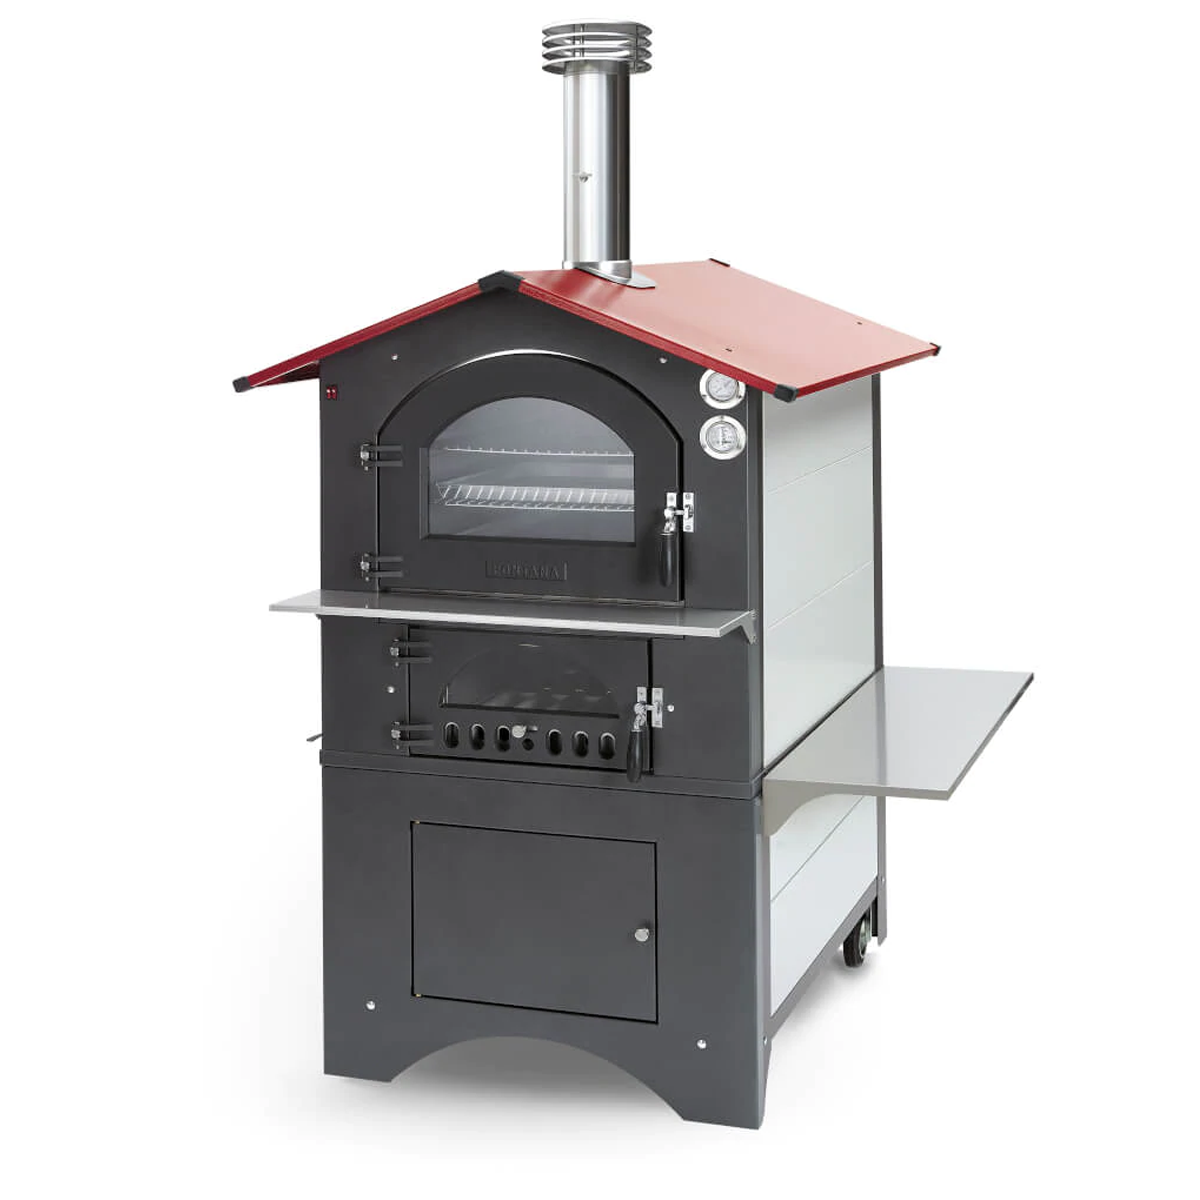 The Rosso Wood Oven